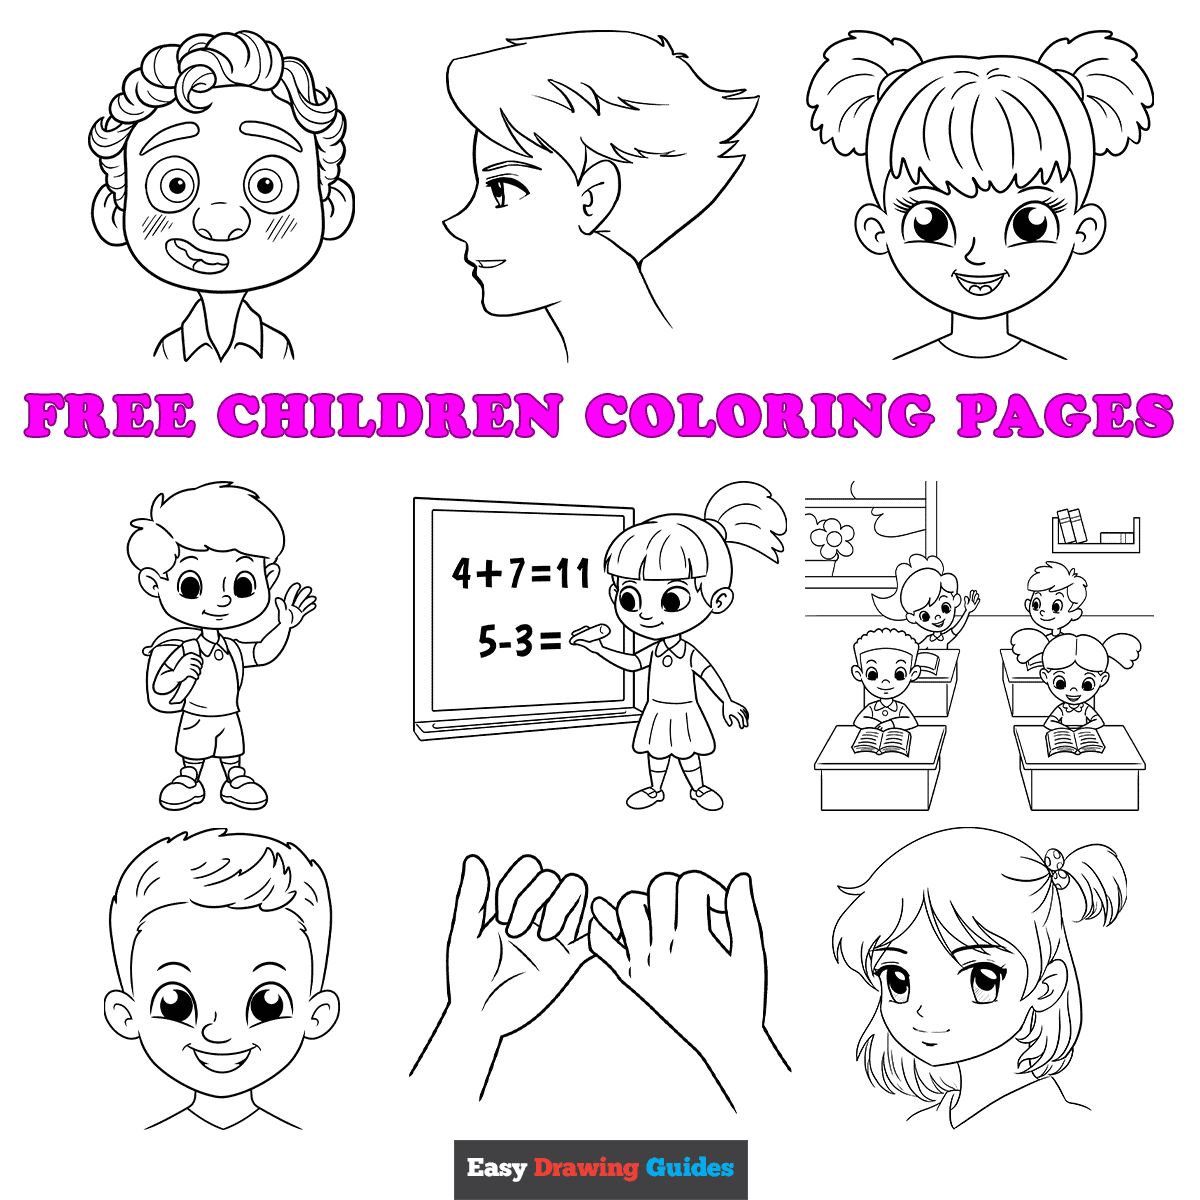 Free printable children coloring pages for kids